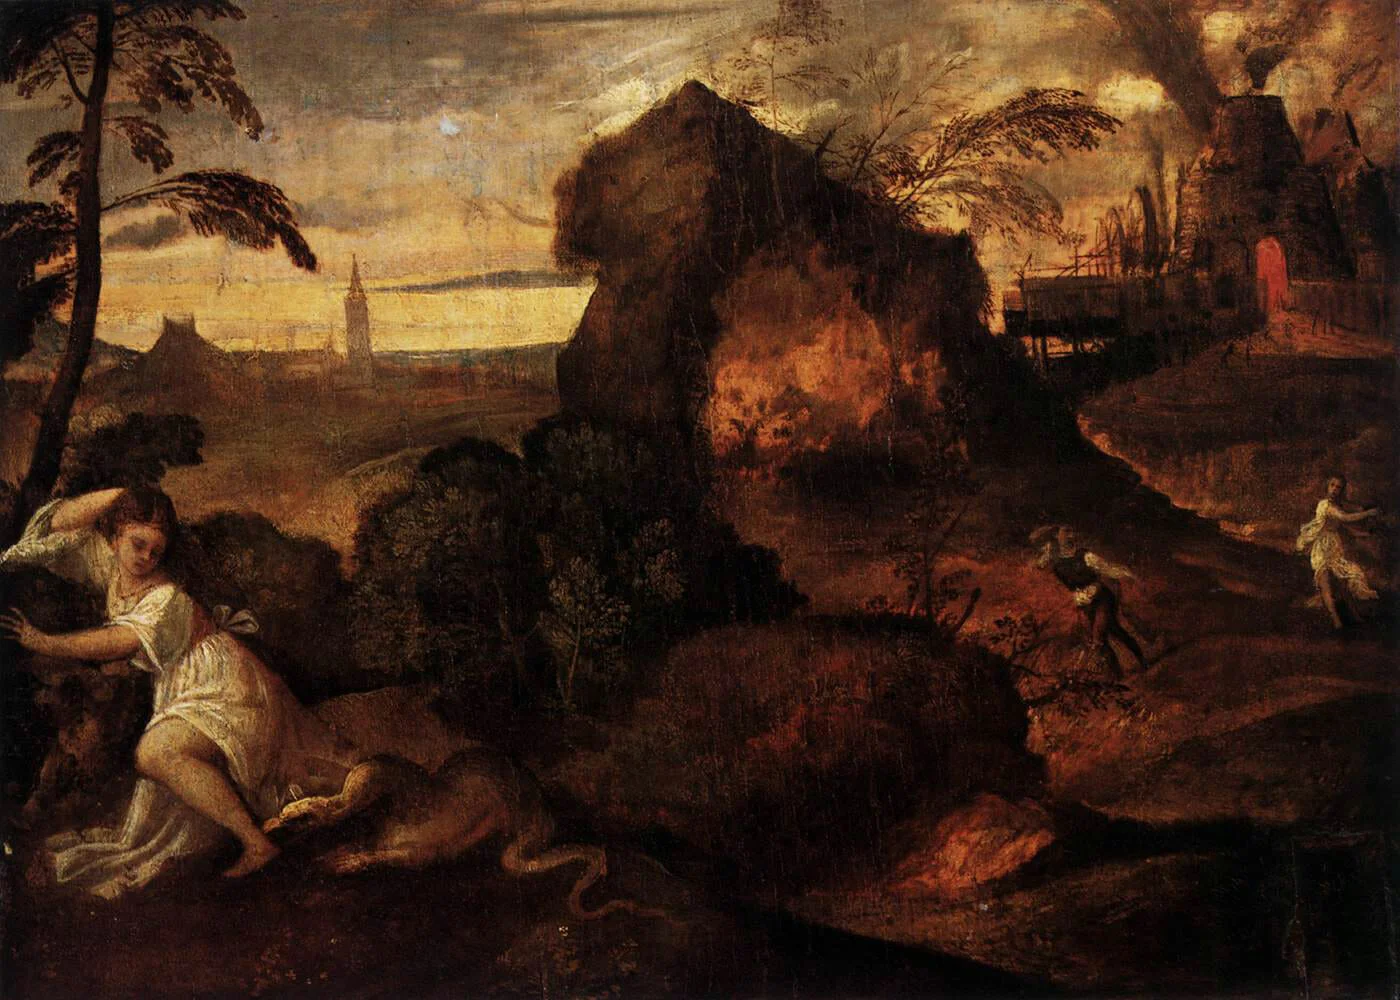 Orpheus and Eurydice | The seeds of Titian's style